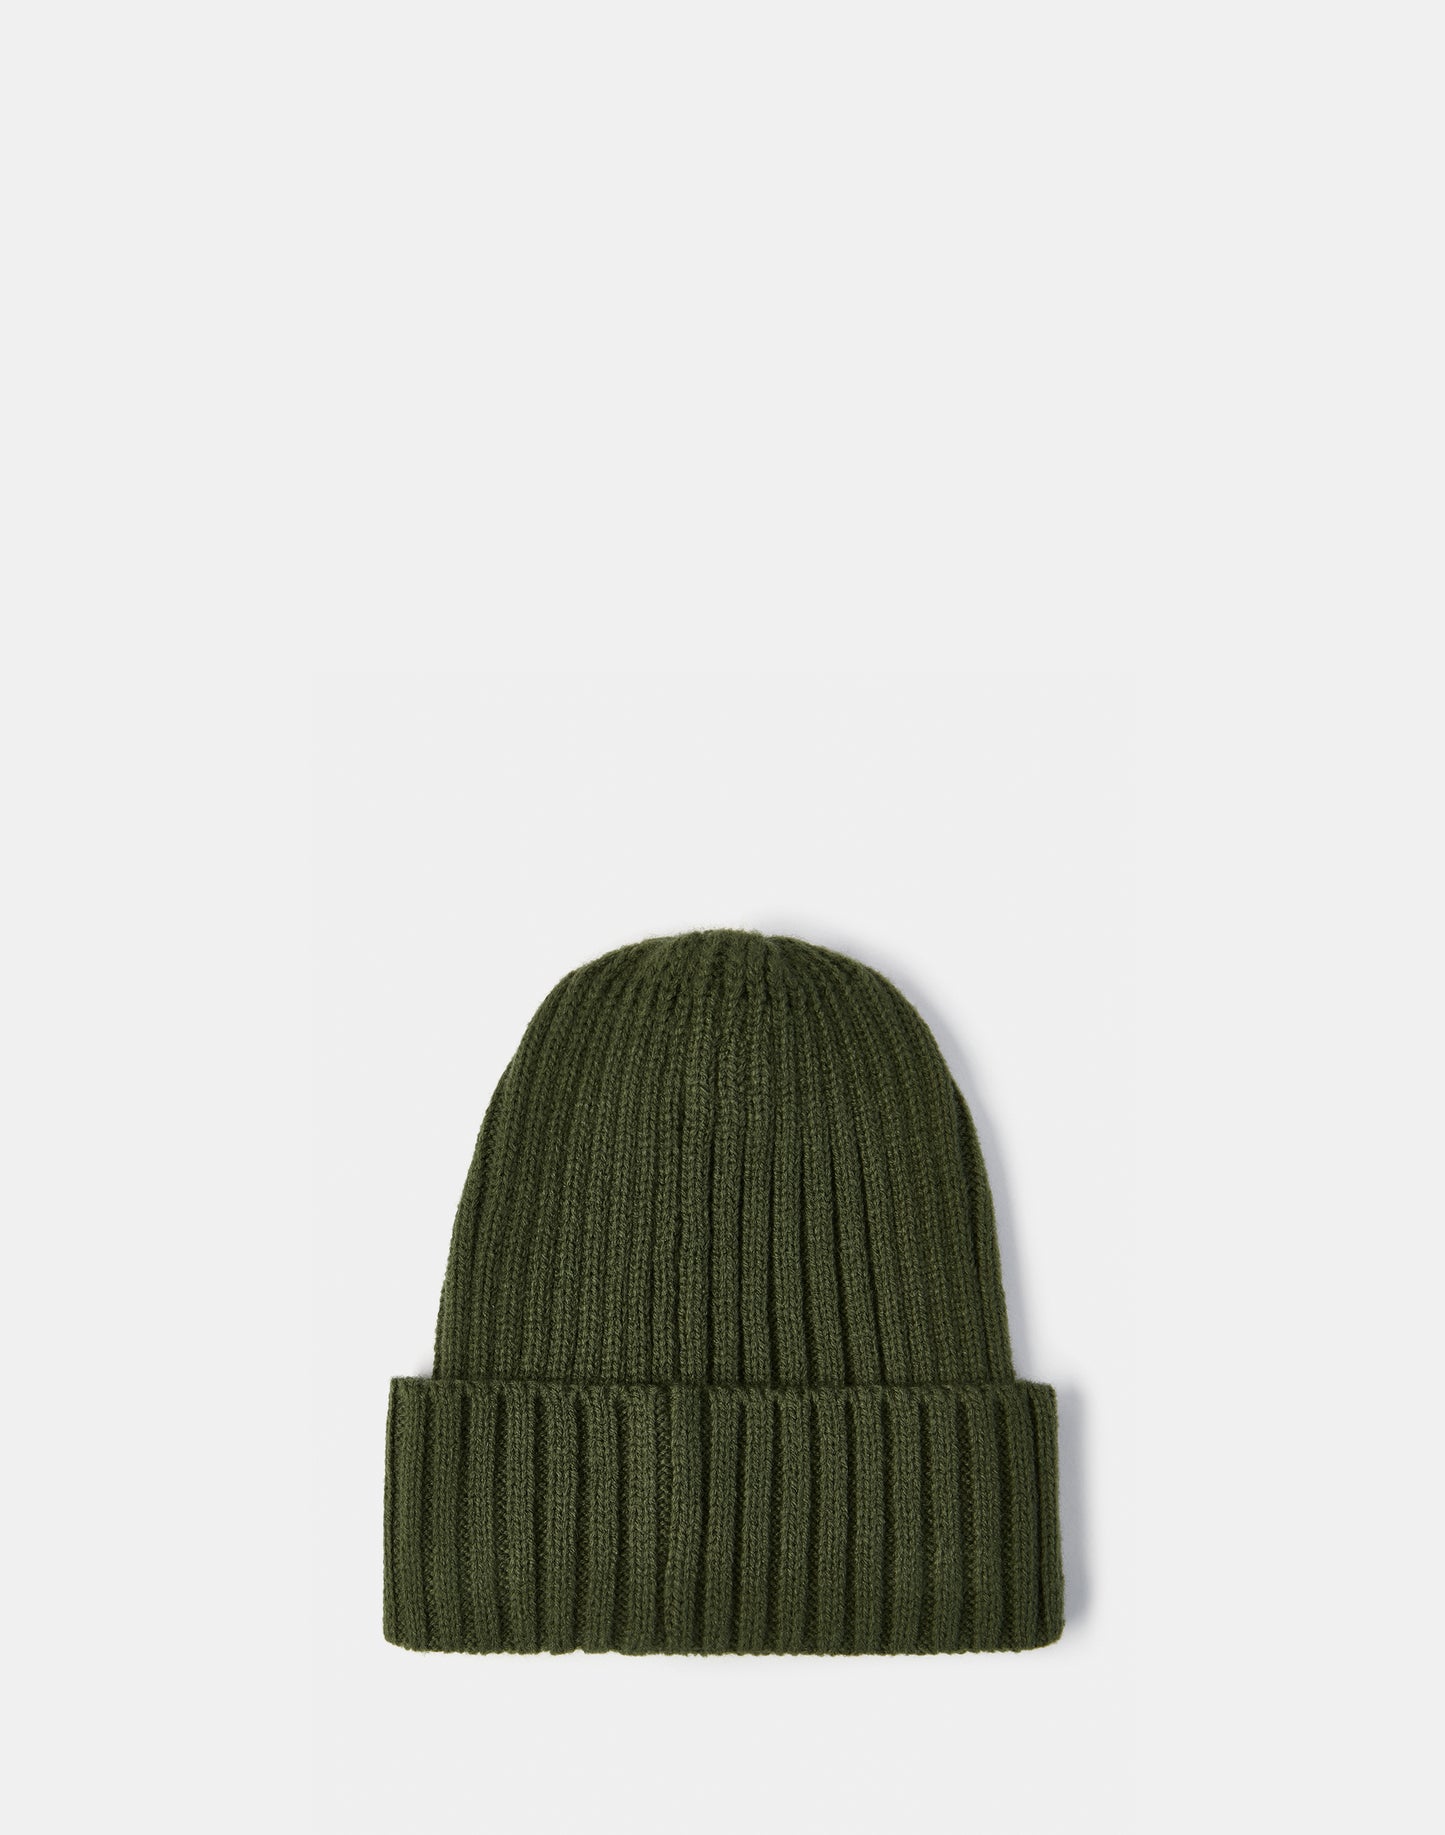 RIBBED CHILD'S HAT WITH LOGO